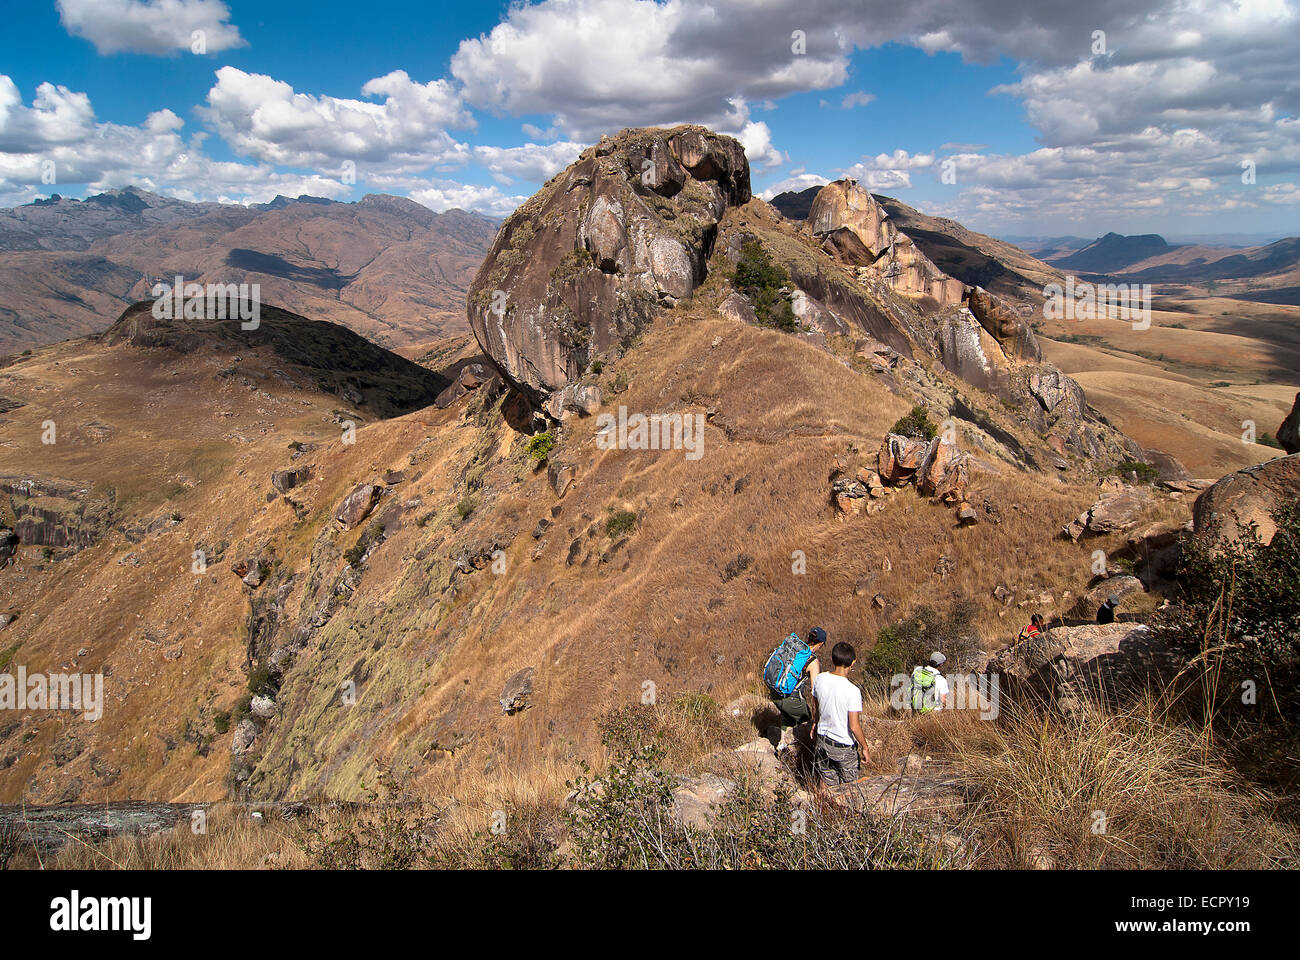 Trekkers on a guided day-walk in the Tsaranoro Massif, Madagascar. Stock Photo